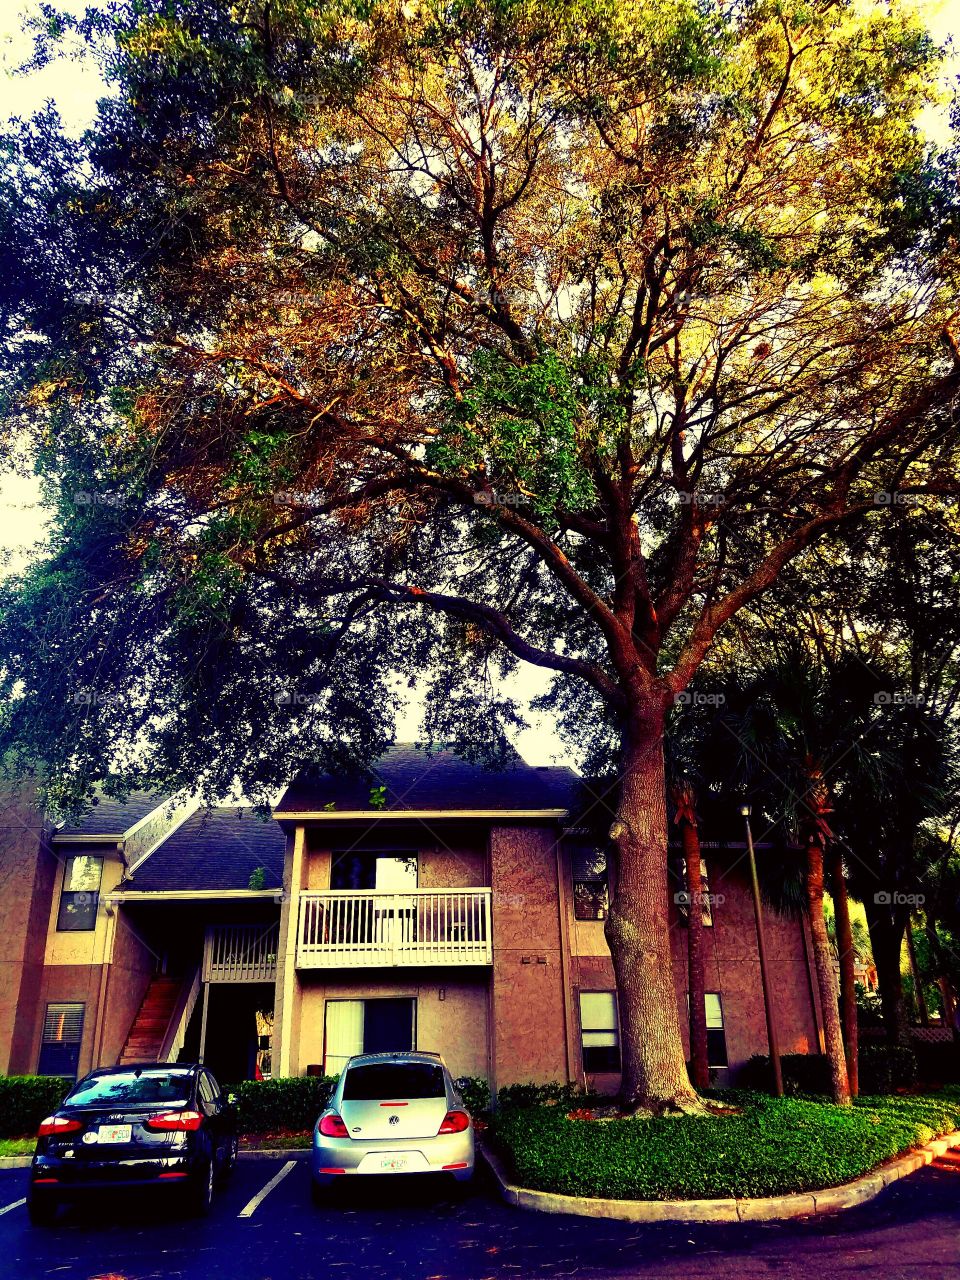 Apartment with beautiful big tree